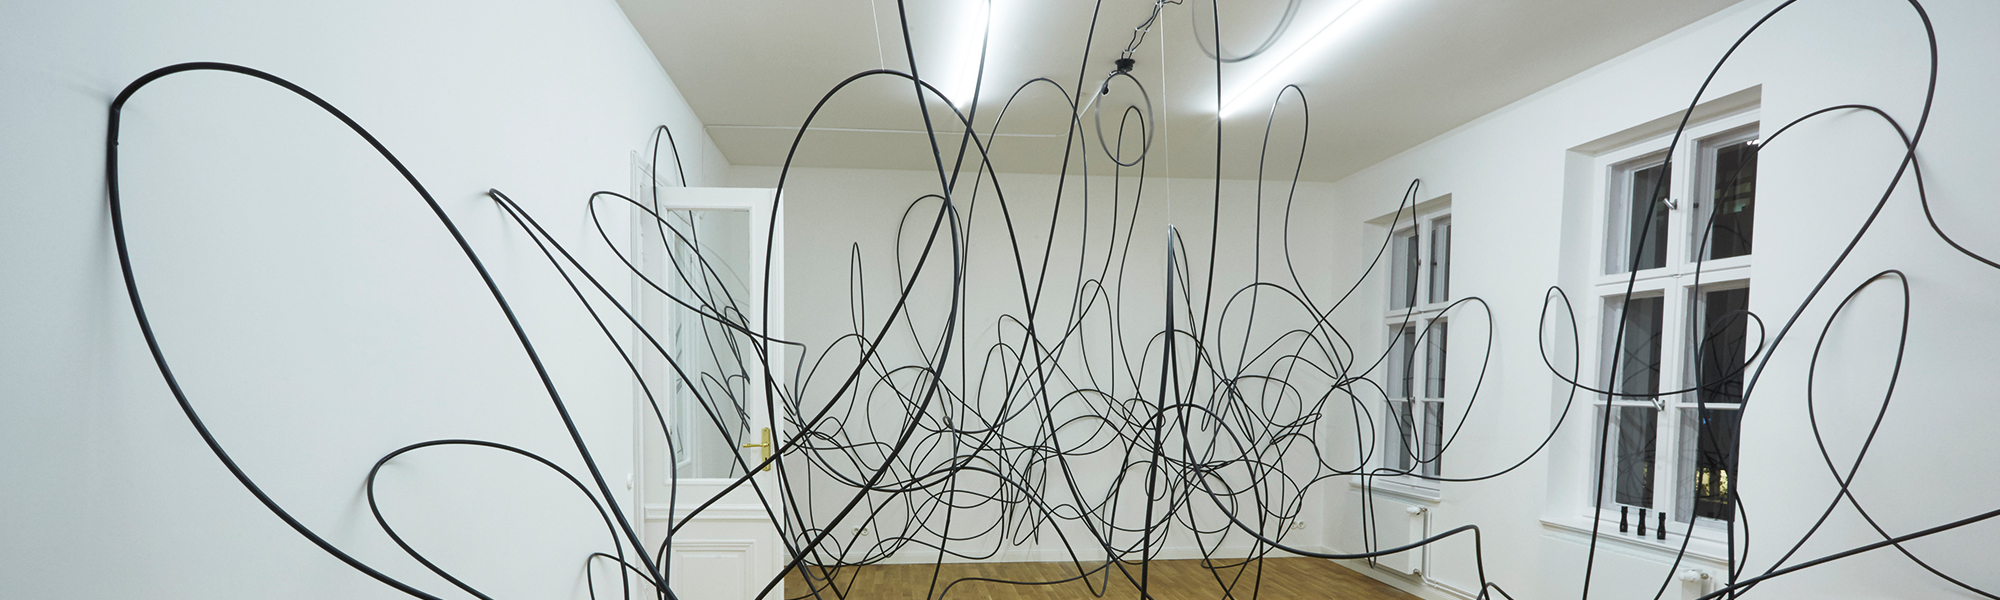 Large Black  Wires Coiled and Spiralling inside a white walled room